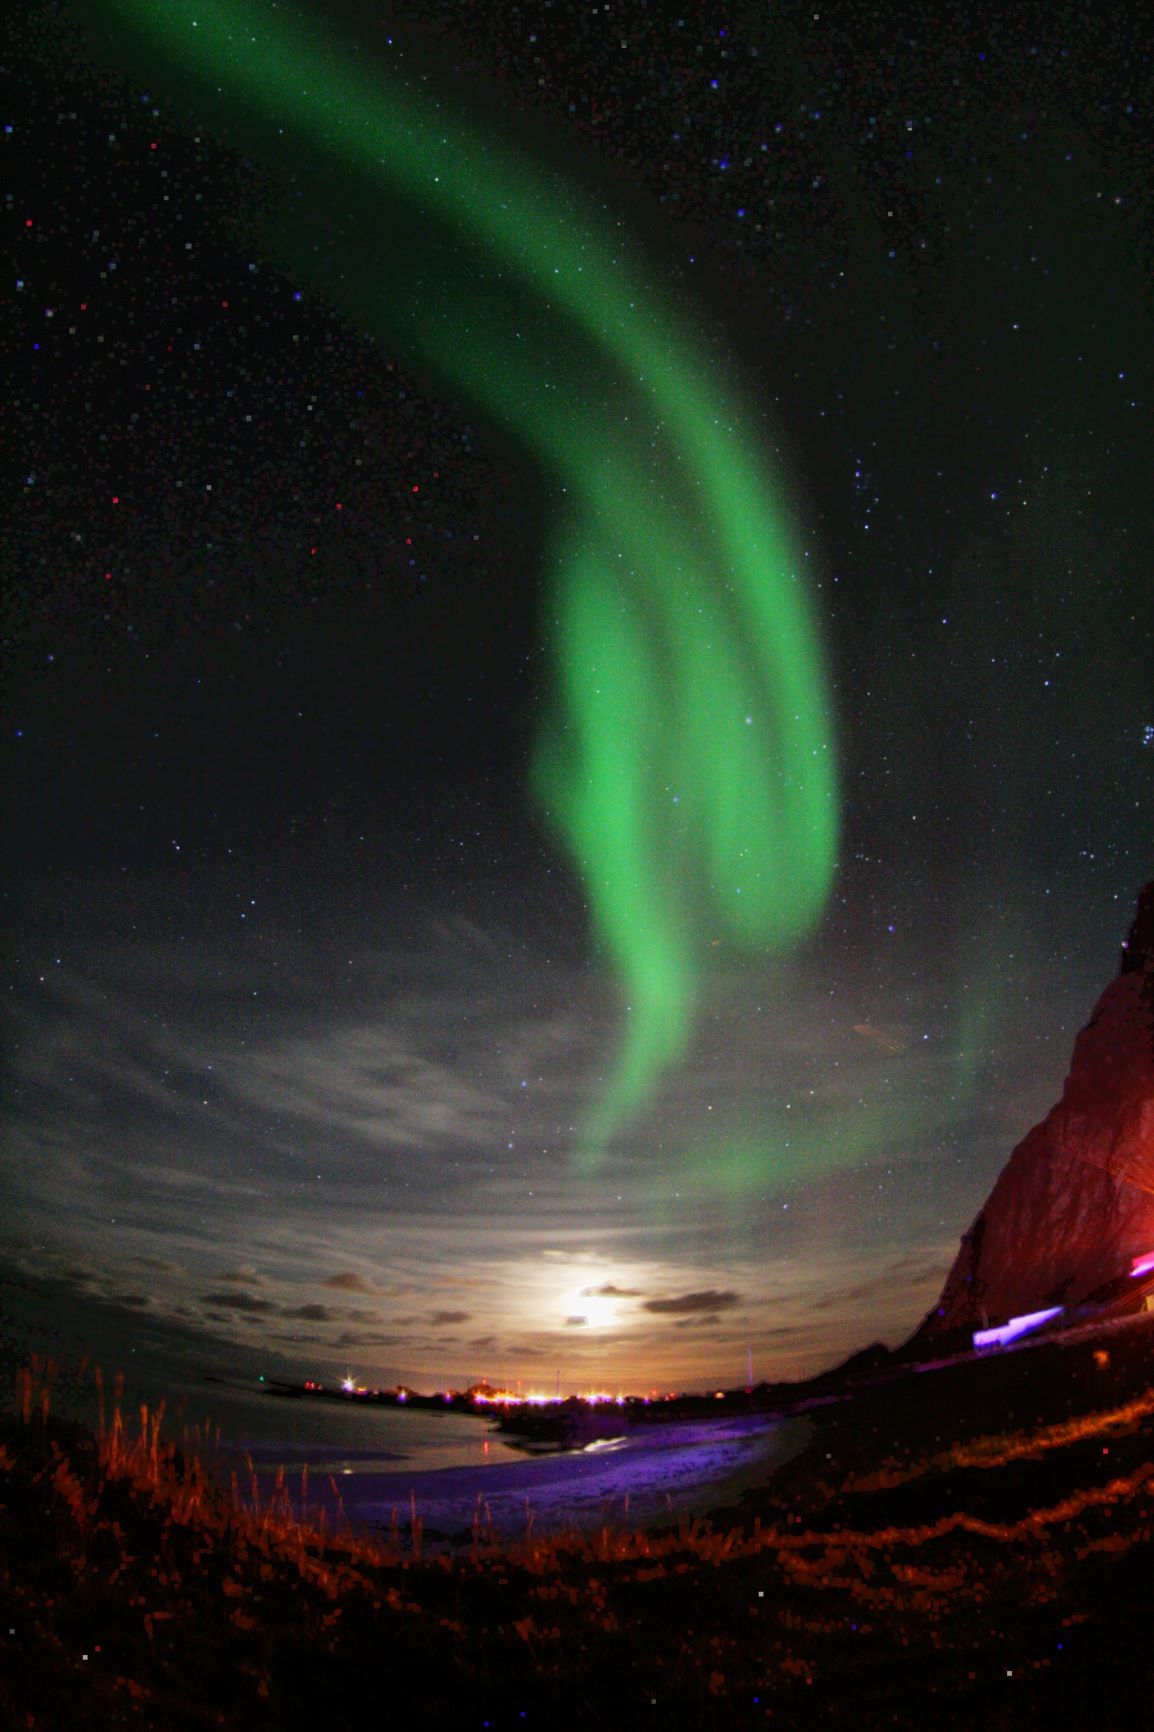 New Study Gives Explanation For Differences In Southern And Northern Lights